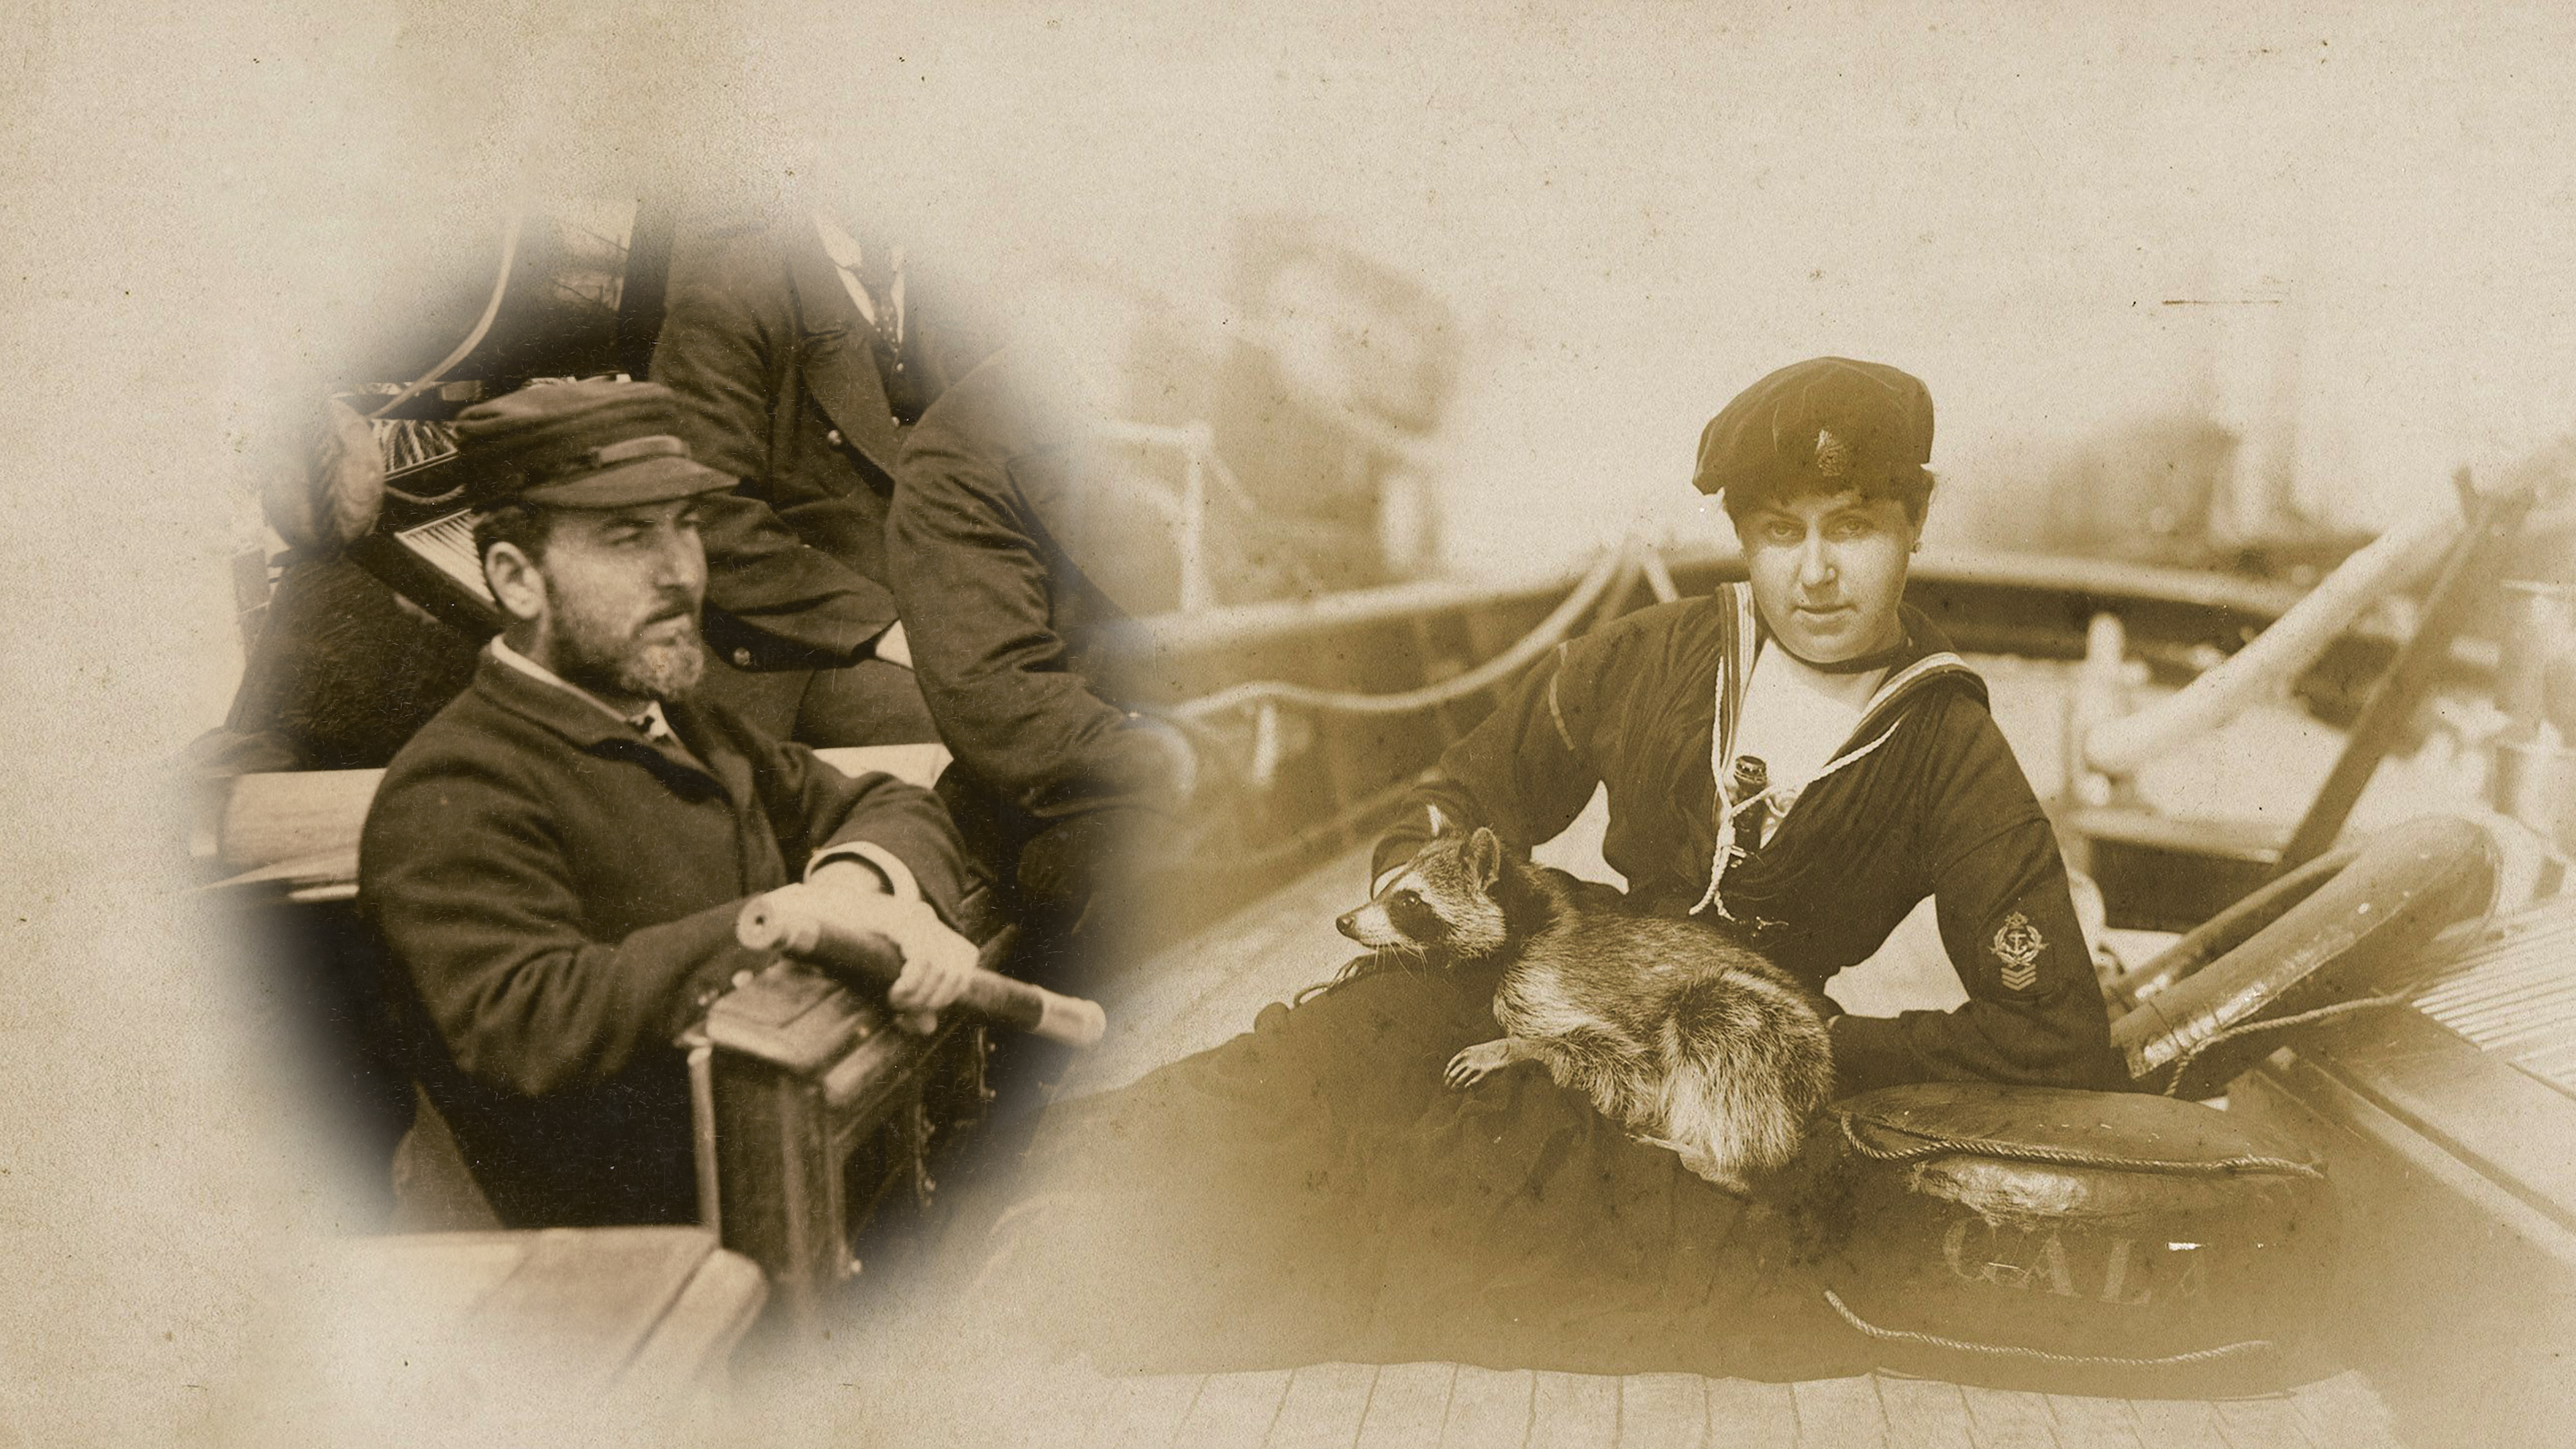 Composition image showing Lt. William Henn (L) and Susan Henn with her pet Raccoon (R).